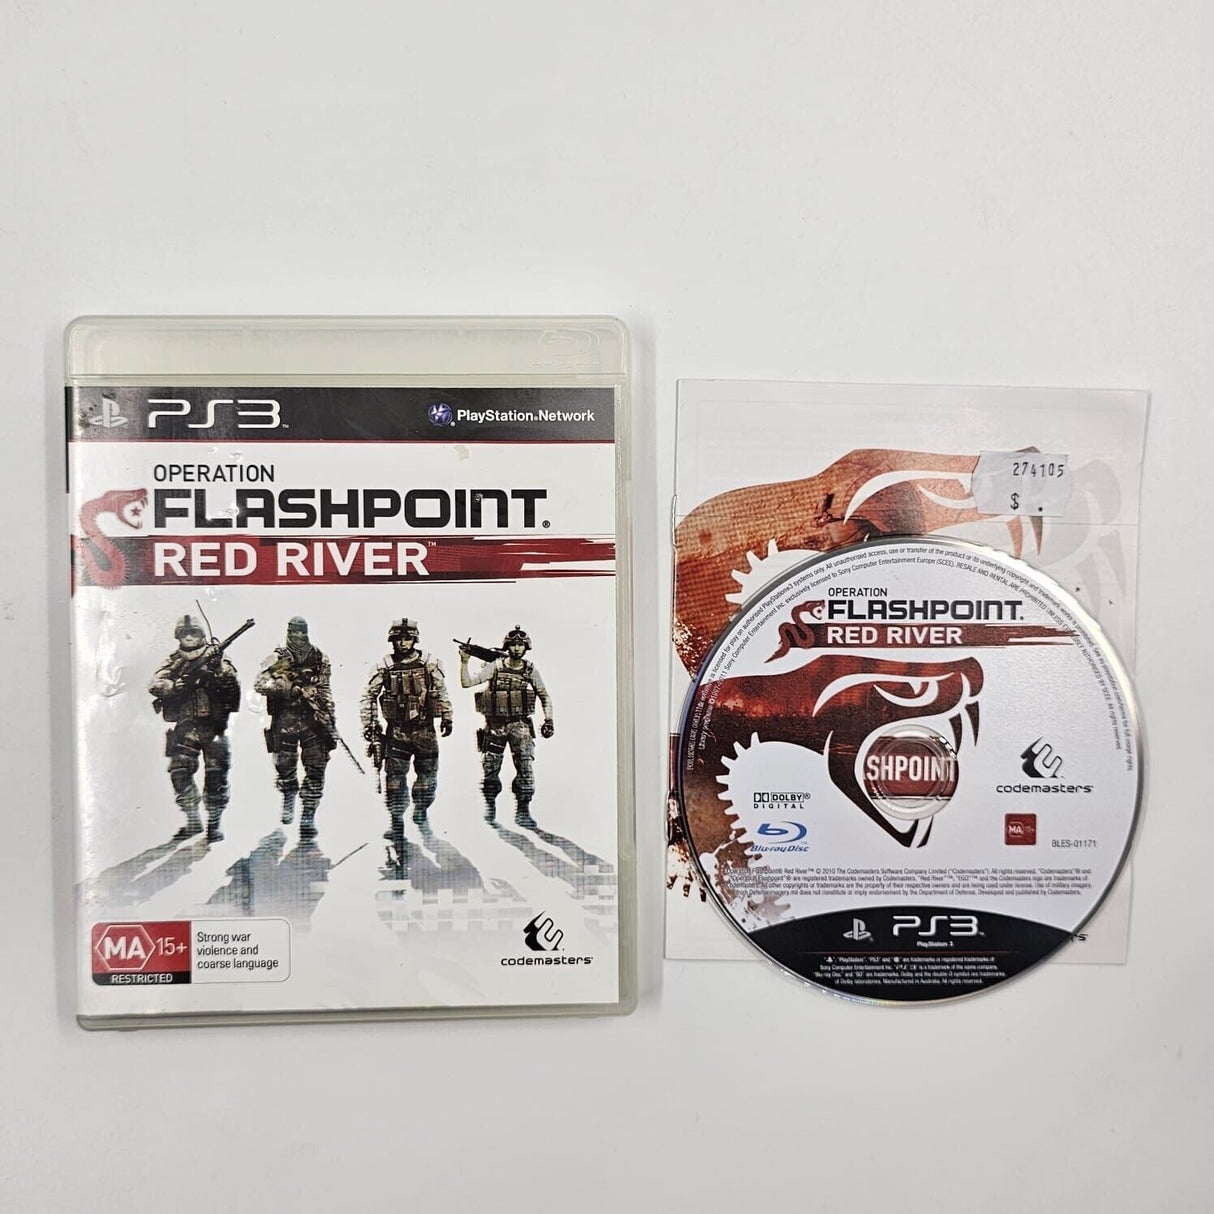 Operation Flashpoint Red River PS3 PlayStation 3 game + Manual